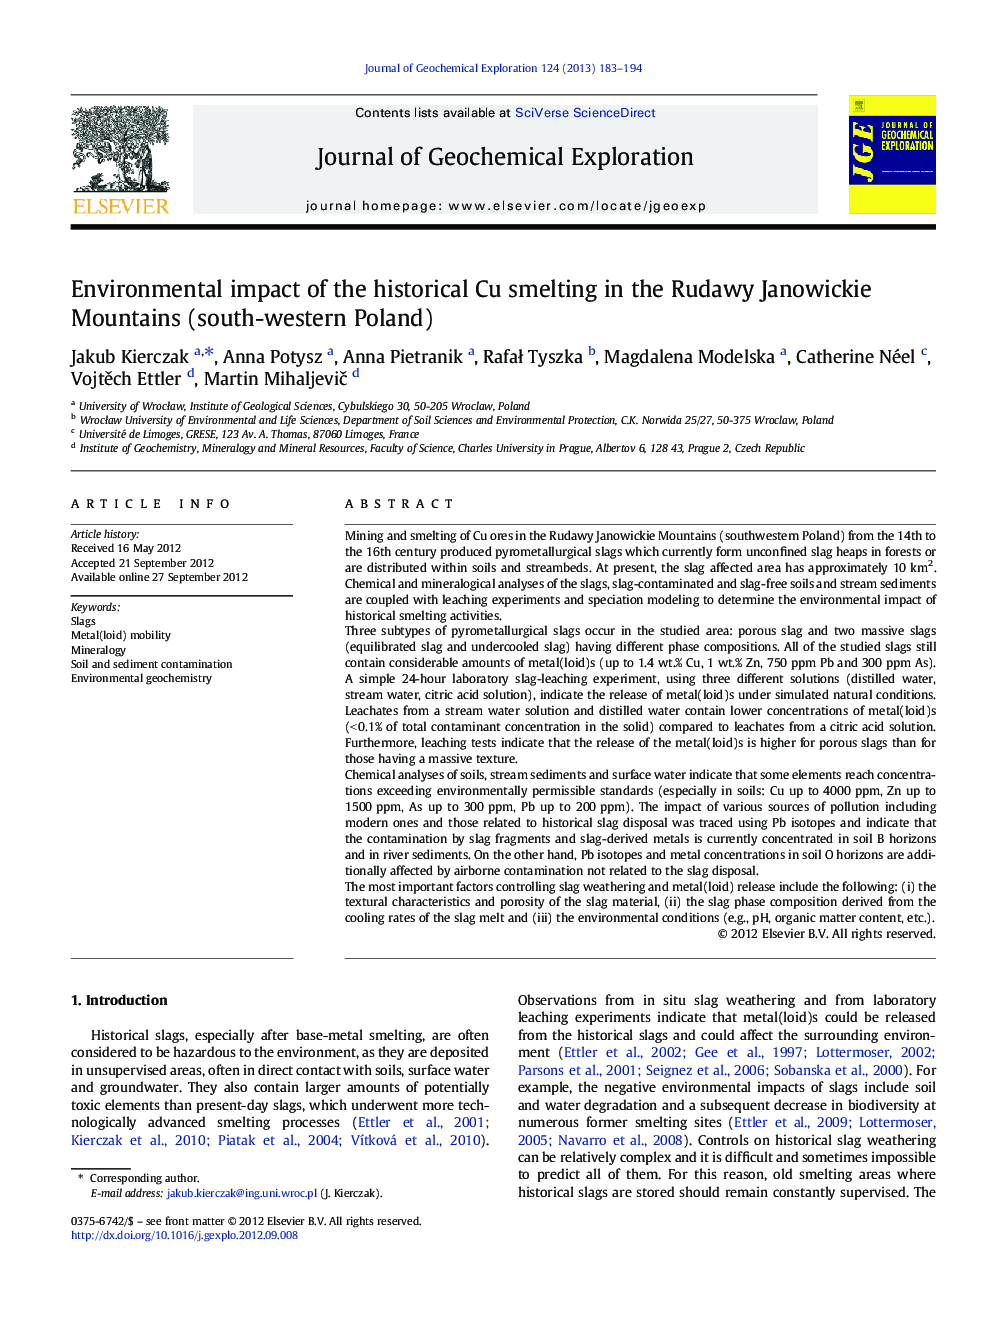 Environmental impact of the historical Cu smelting in the Rudawy Janowickie Mountains (south-western Poland)